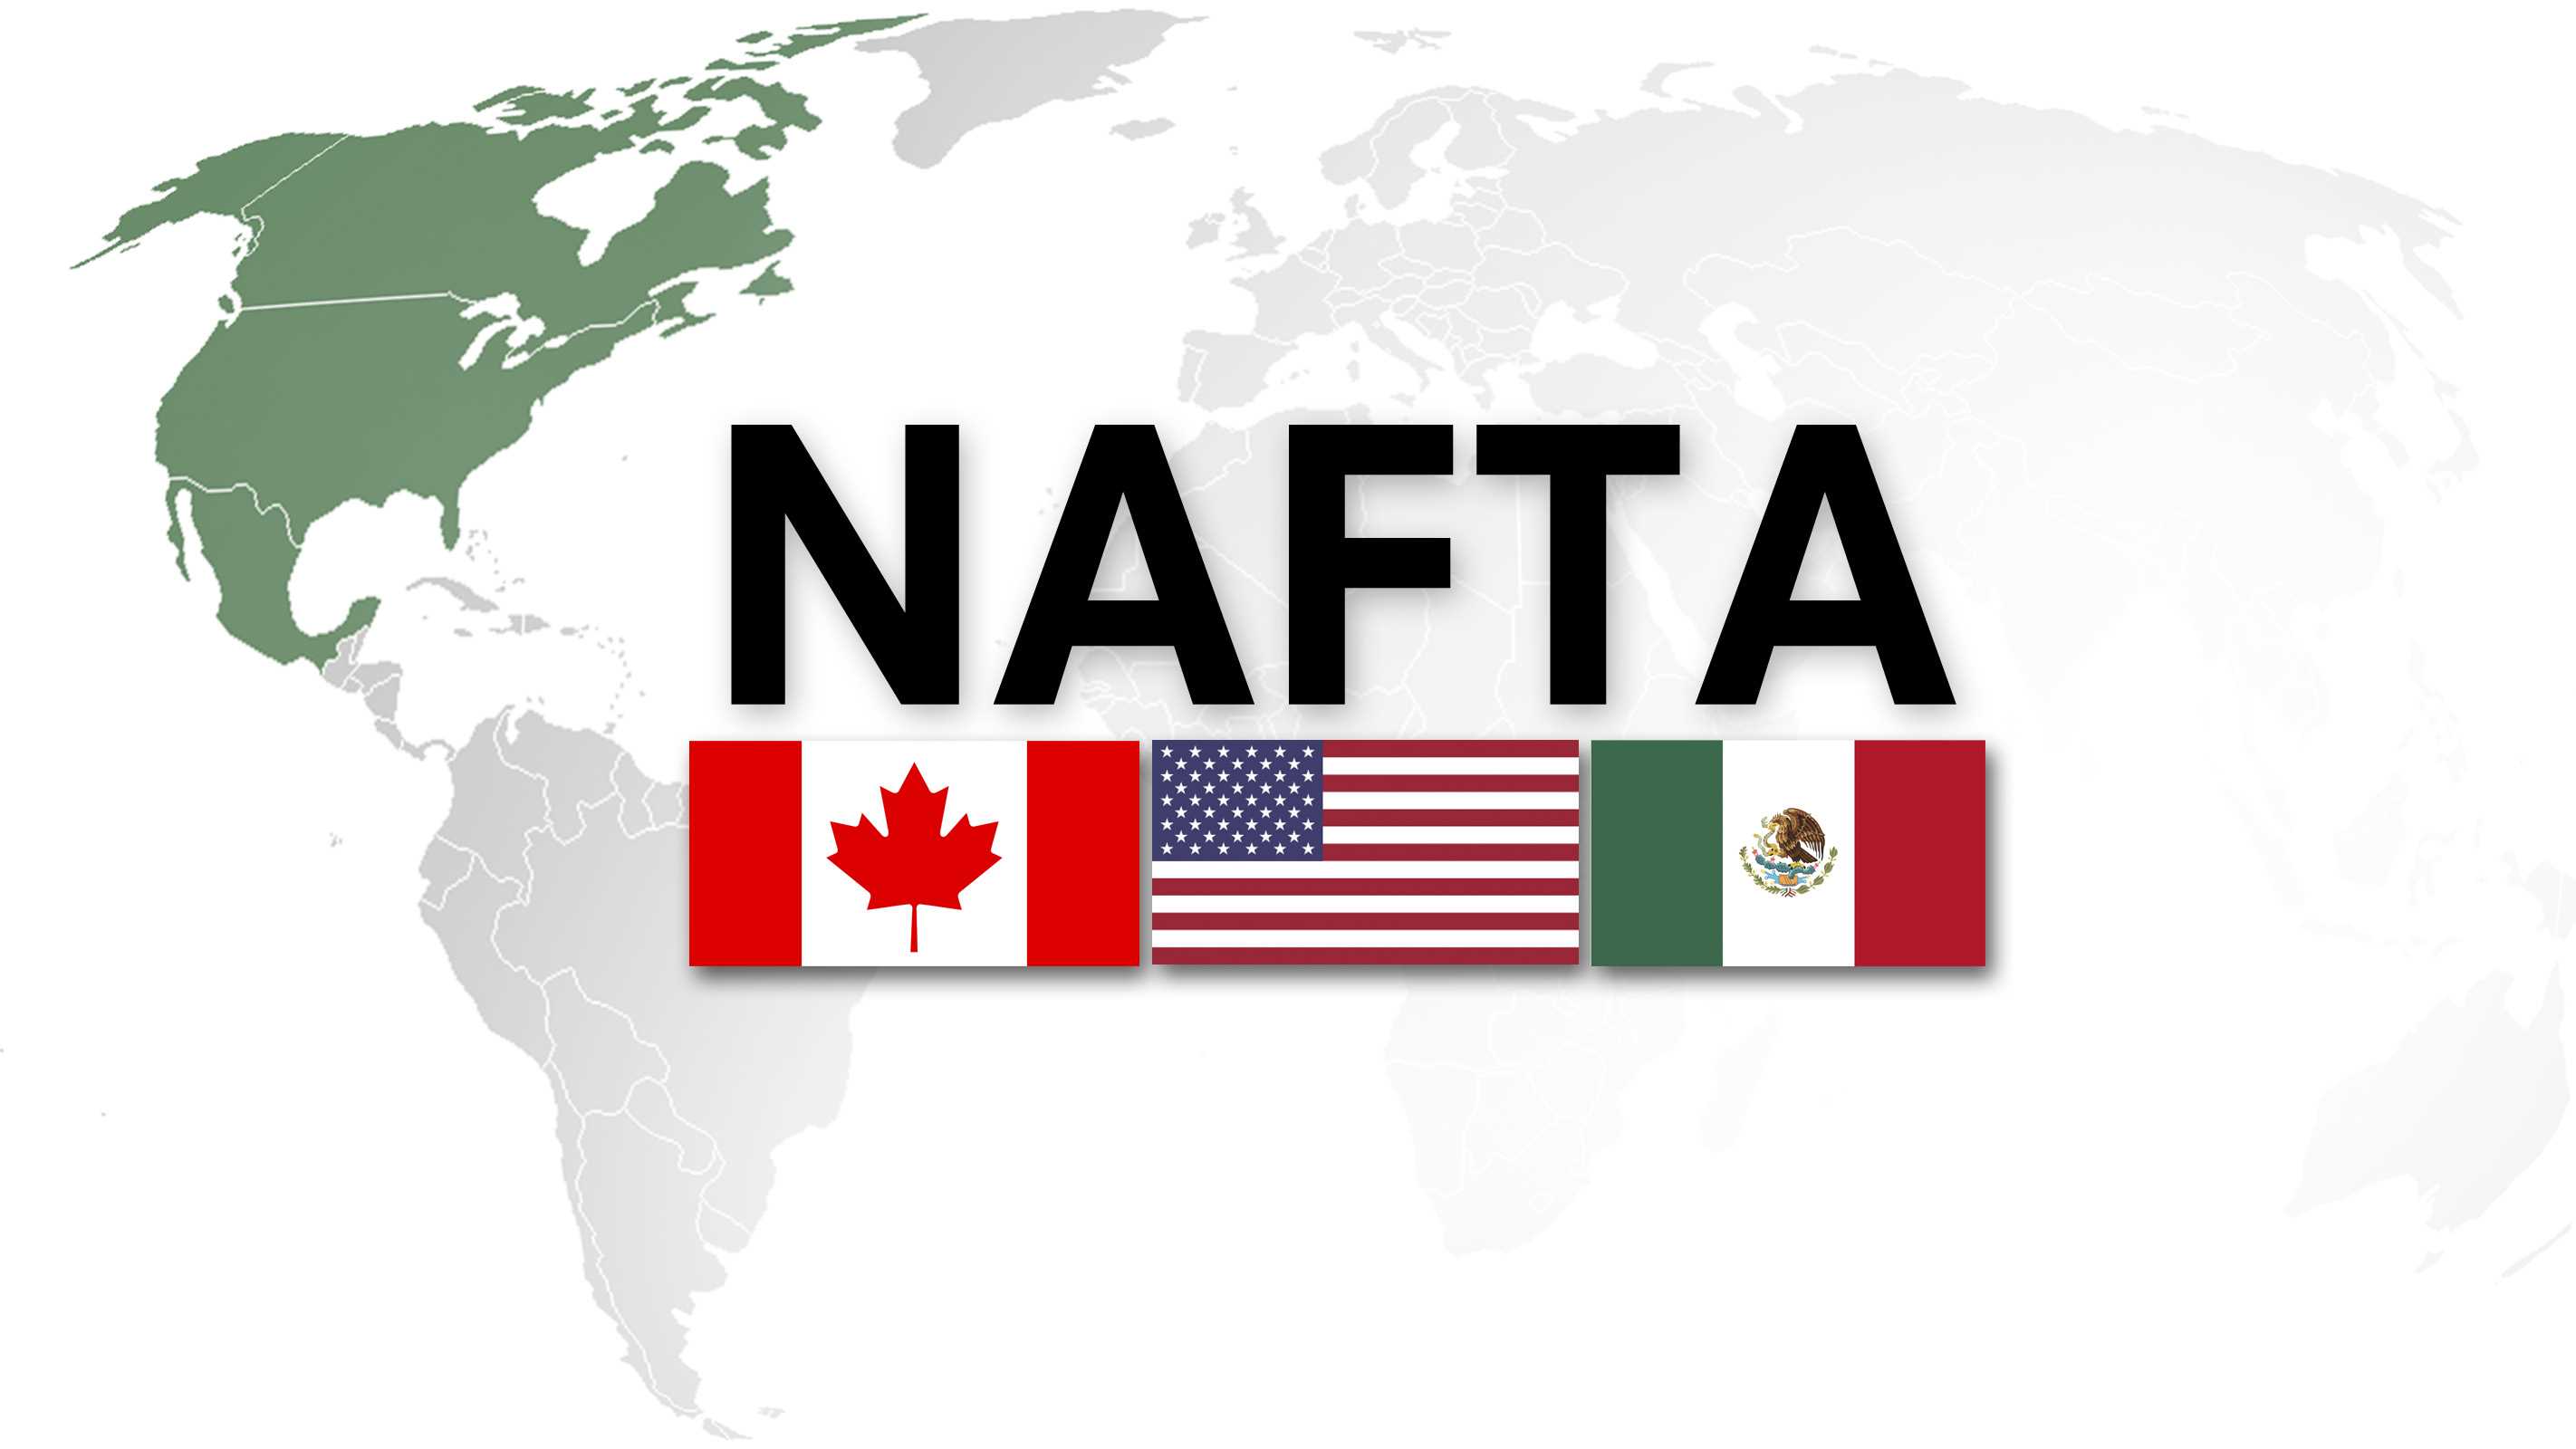 NAFTA pros and cons